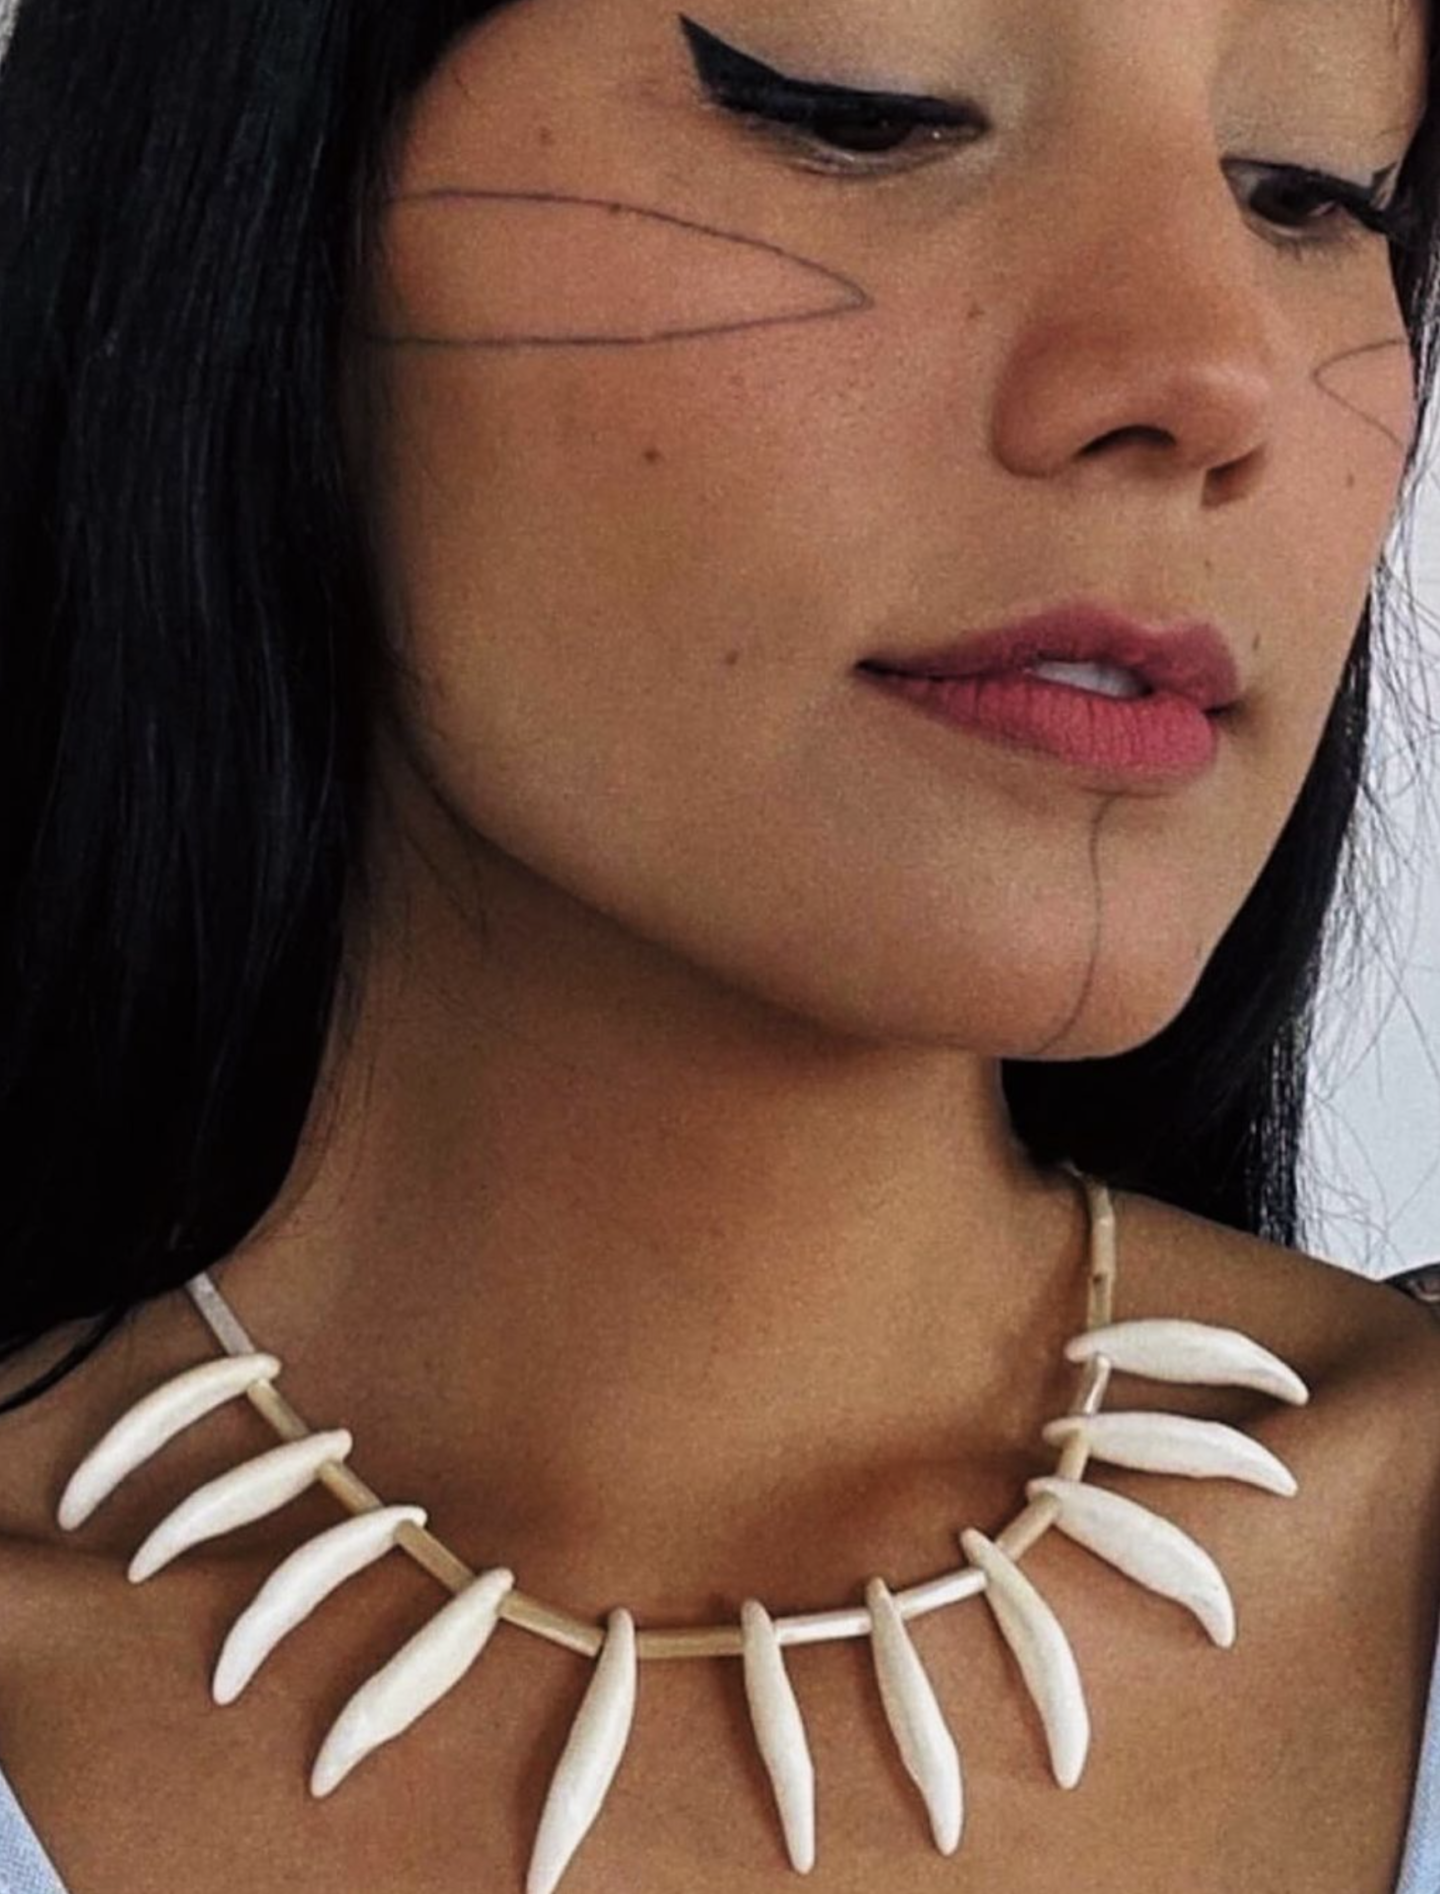 Inner Wolf Jewelry is one of The Chief of Style's picks for hottest jewelry brands you absolutely need on your radar